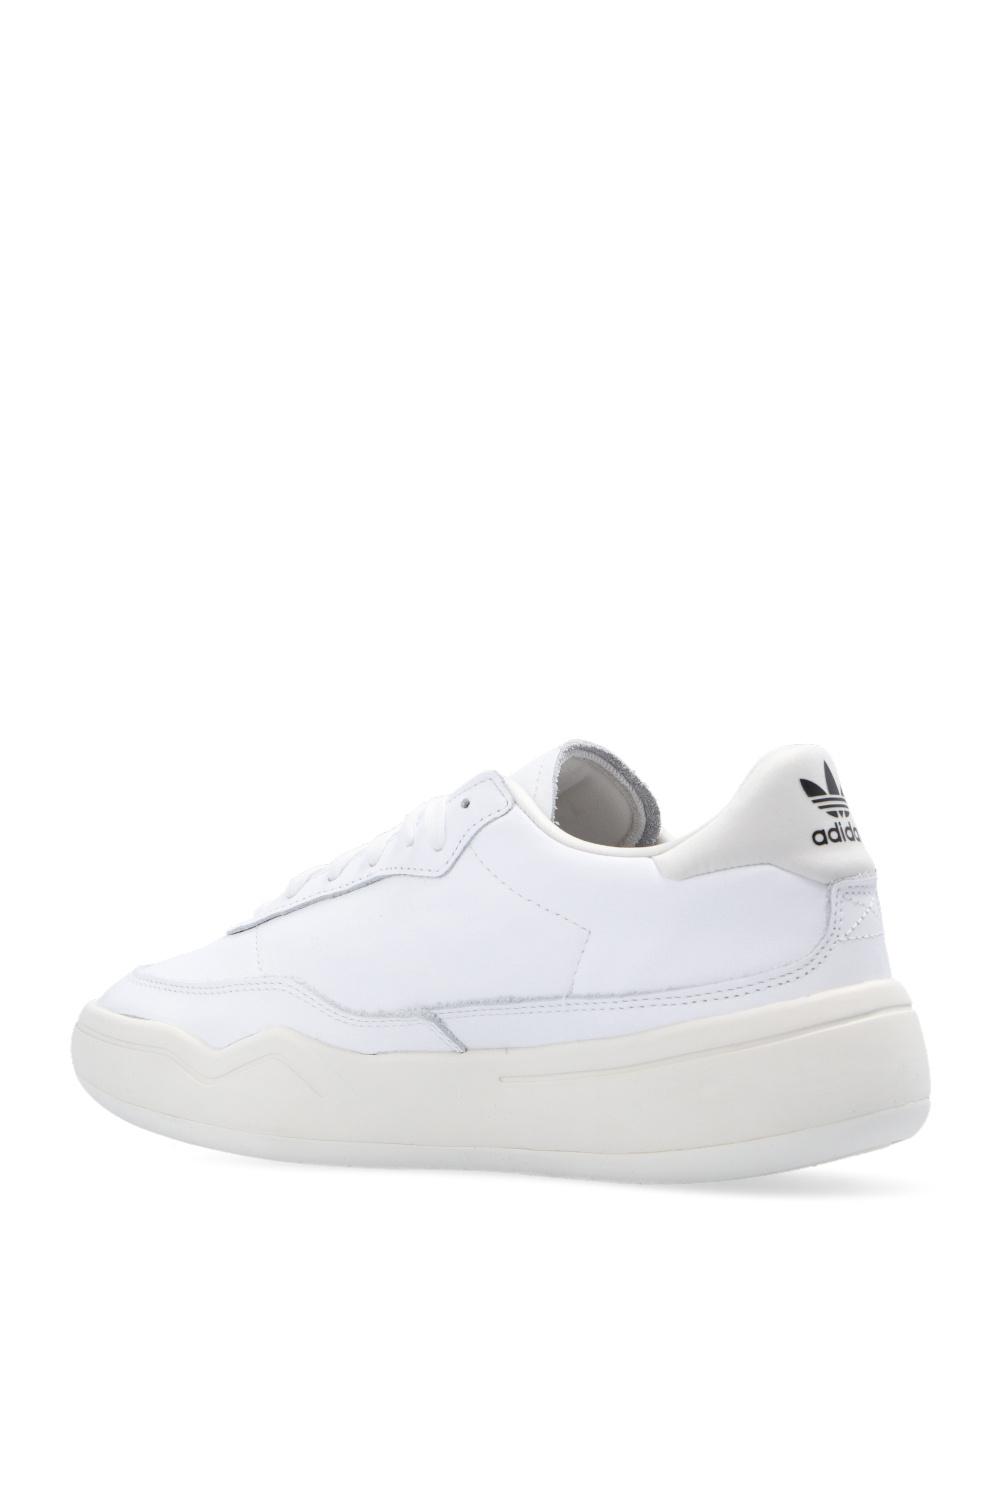 adidas Originals Leather 'her Court' Sneakers in White | Lyst